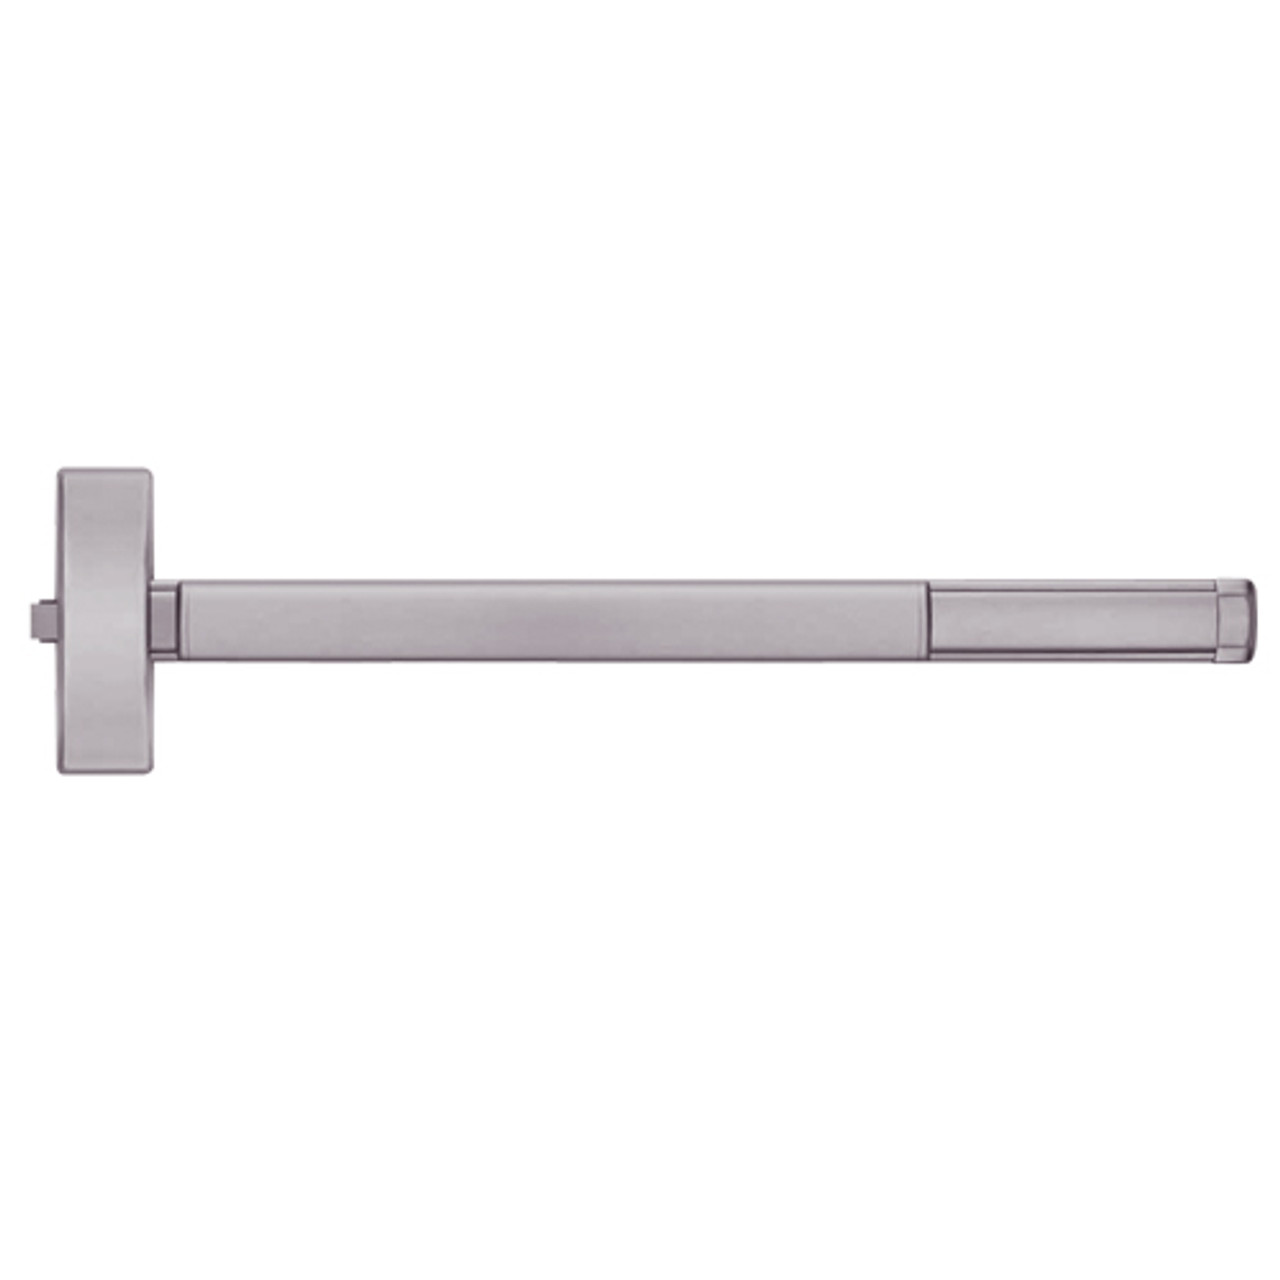 TS2103-630-48 PHI 2100 Series Non Fire Rated Apex Rim Exit Device with Touchbar Monitoring Switch Prepped for Key Retracts Latchbolt in Satin Stainless Steel Finish